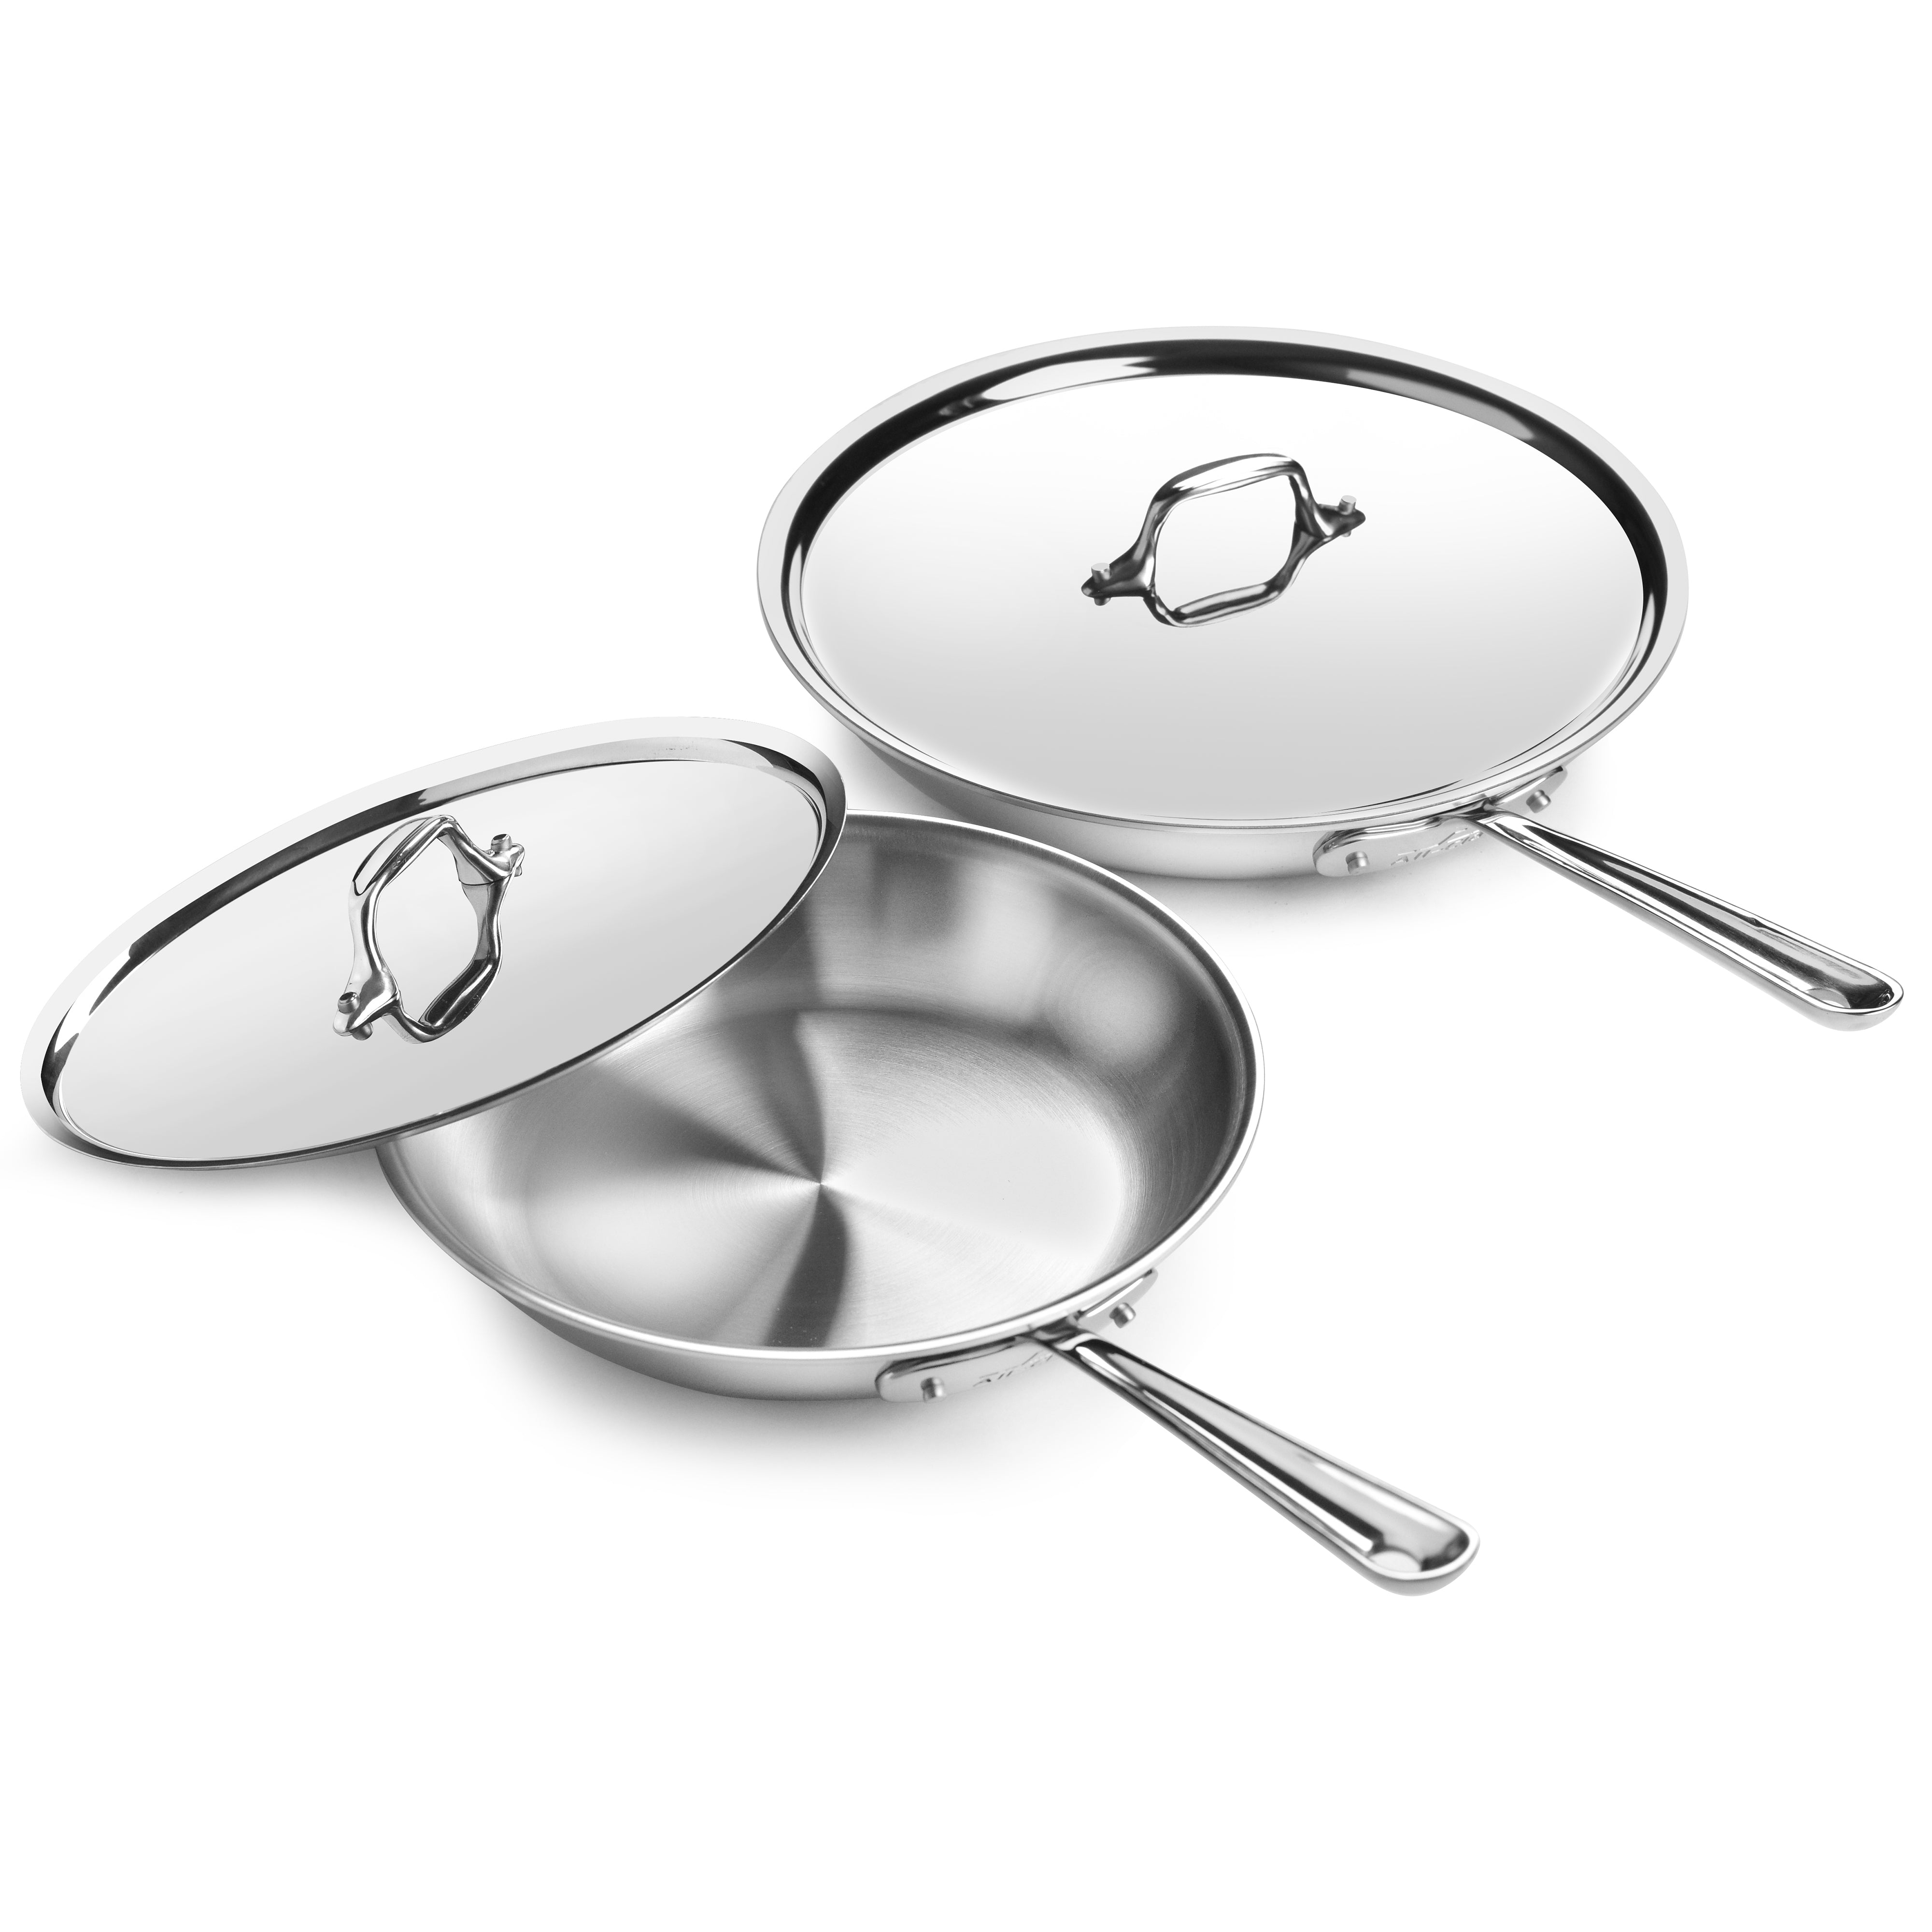 All-Clad Fry Pan Set with Lids - d3 Stainless Steel 10 & 12